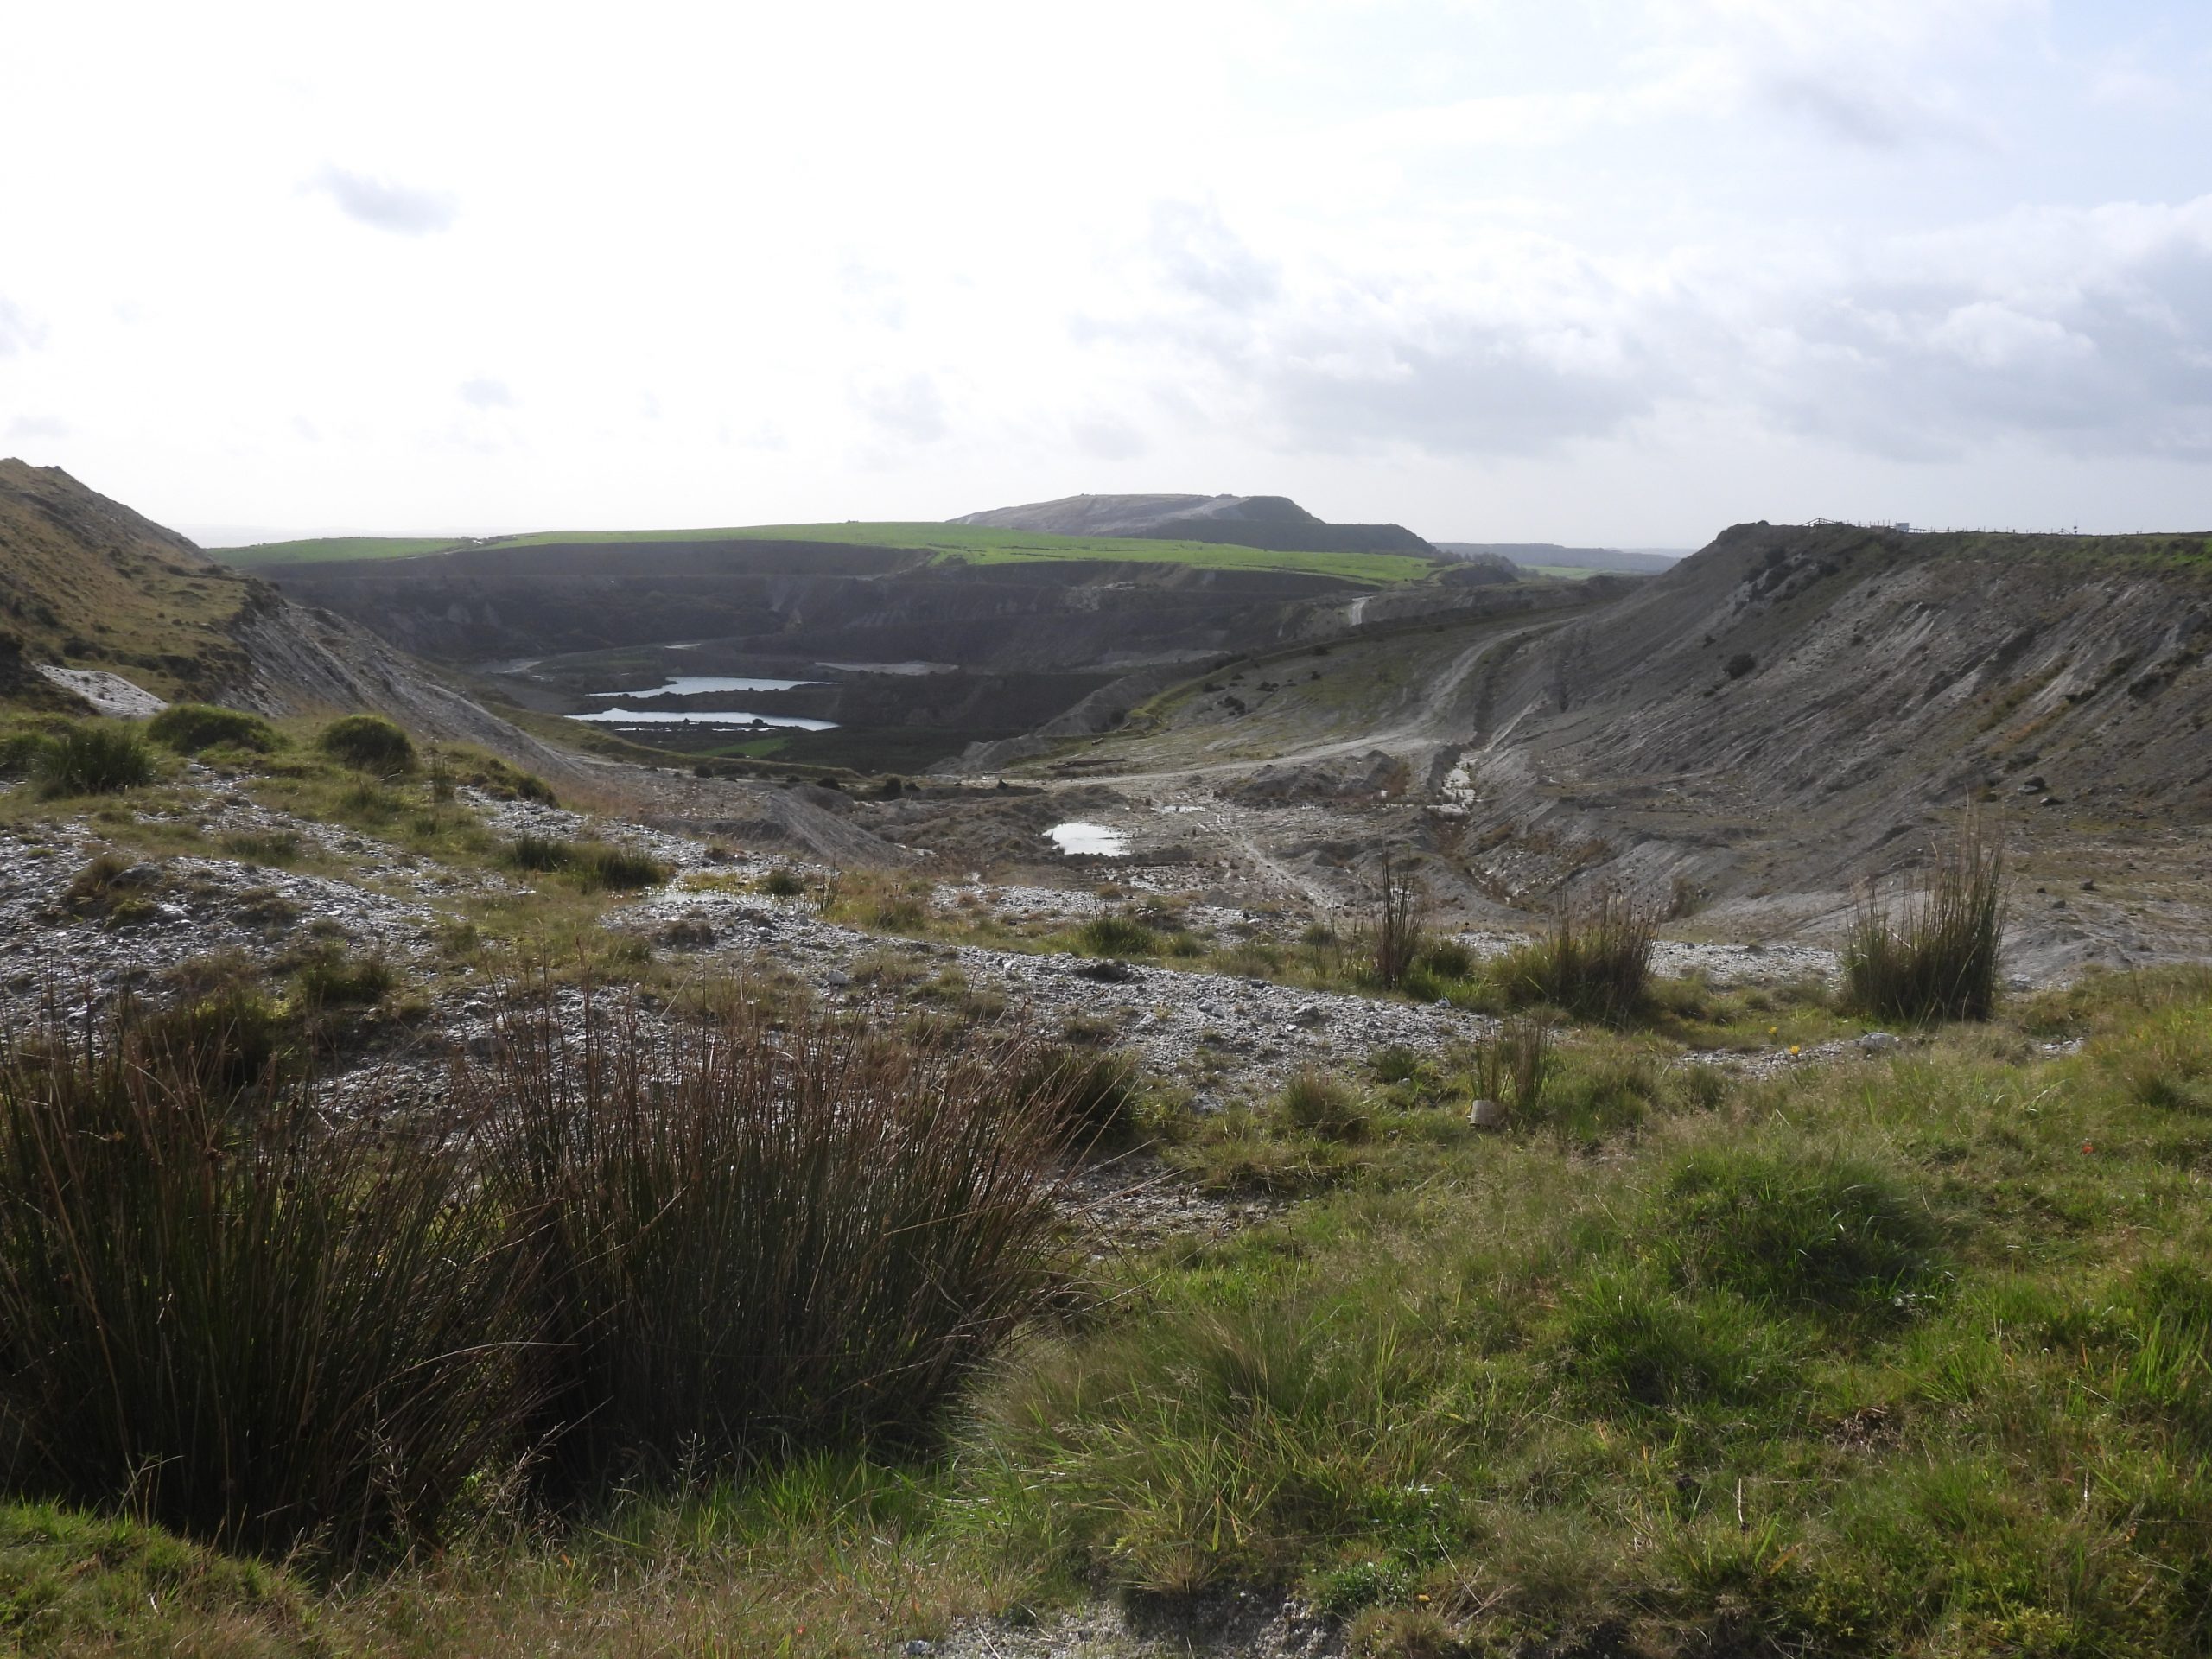 52. Clay Pits